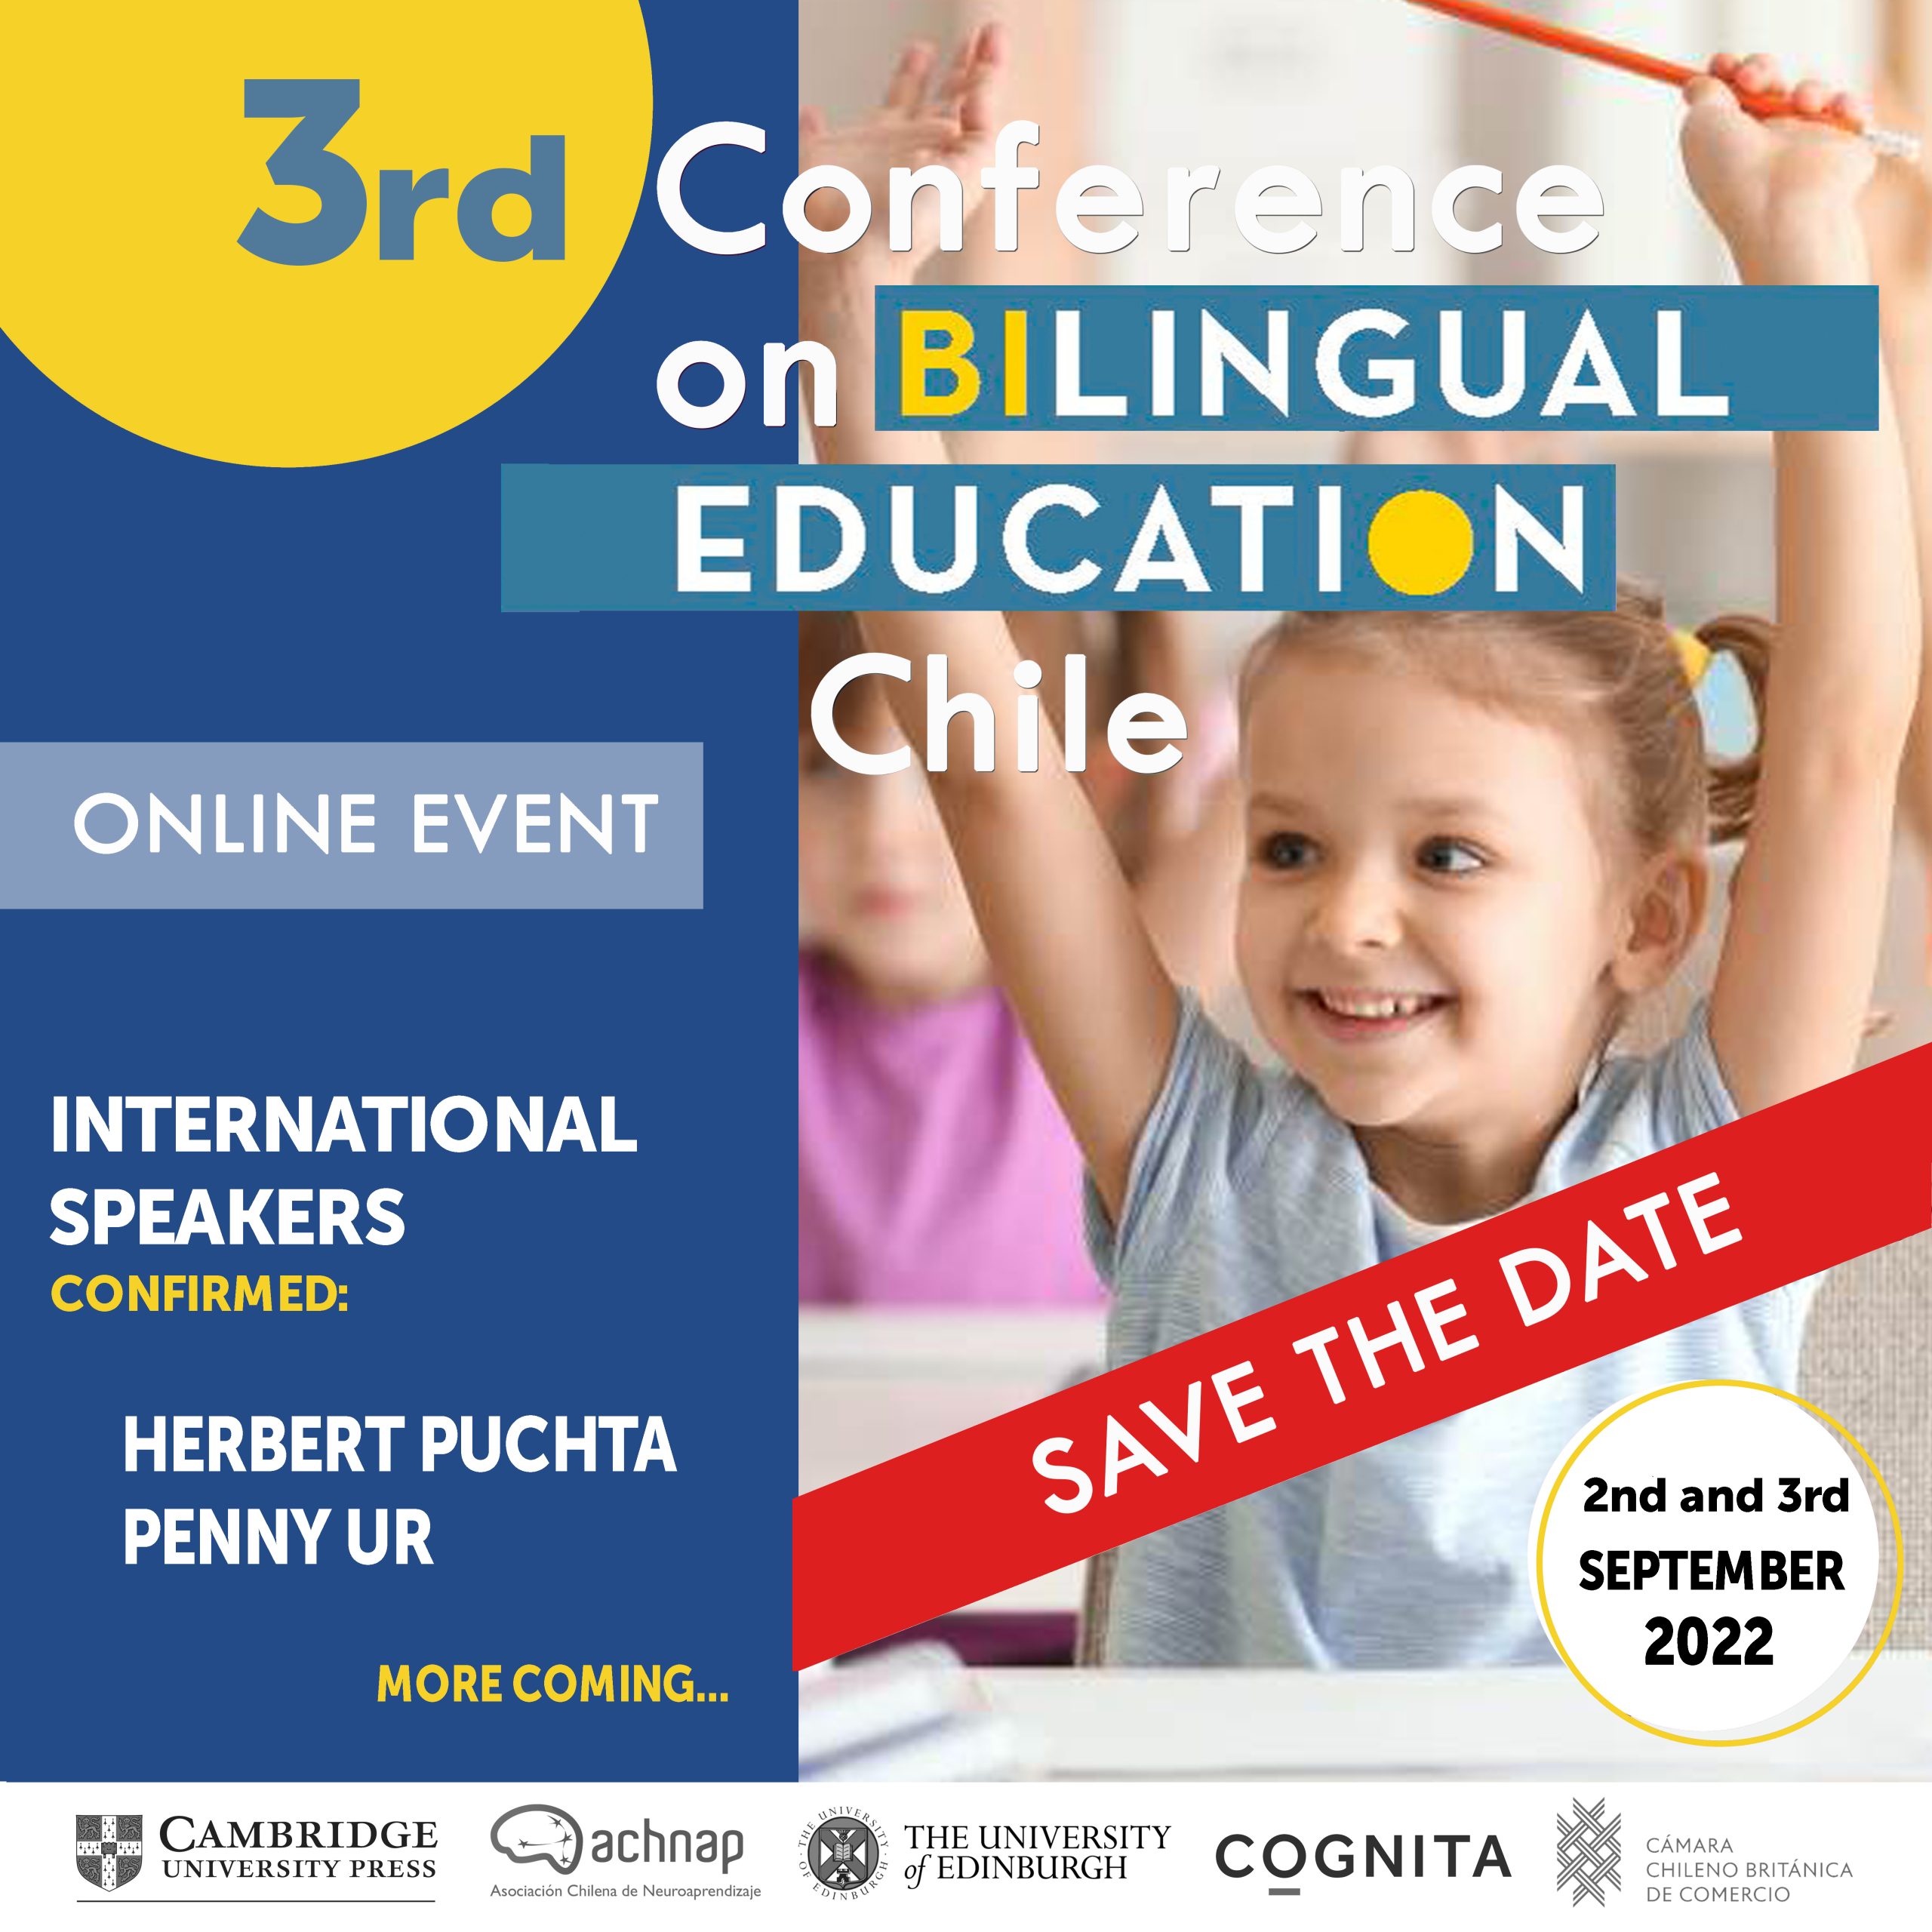 3rd Conference on Bilingual Education 2022 BritCham